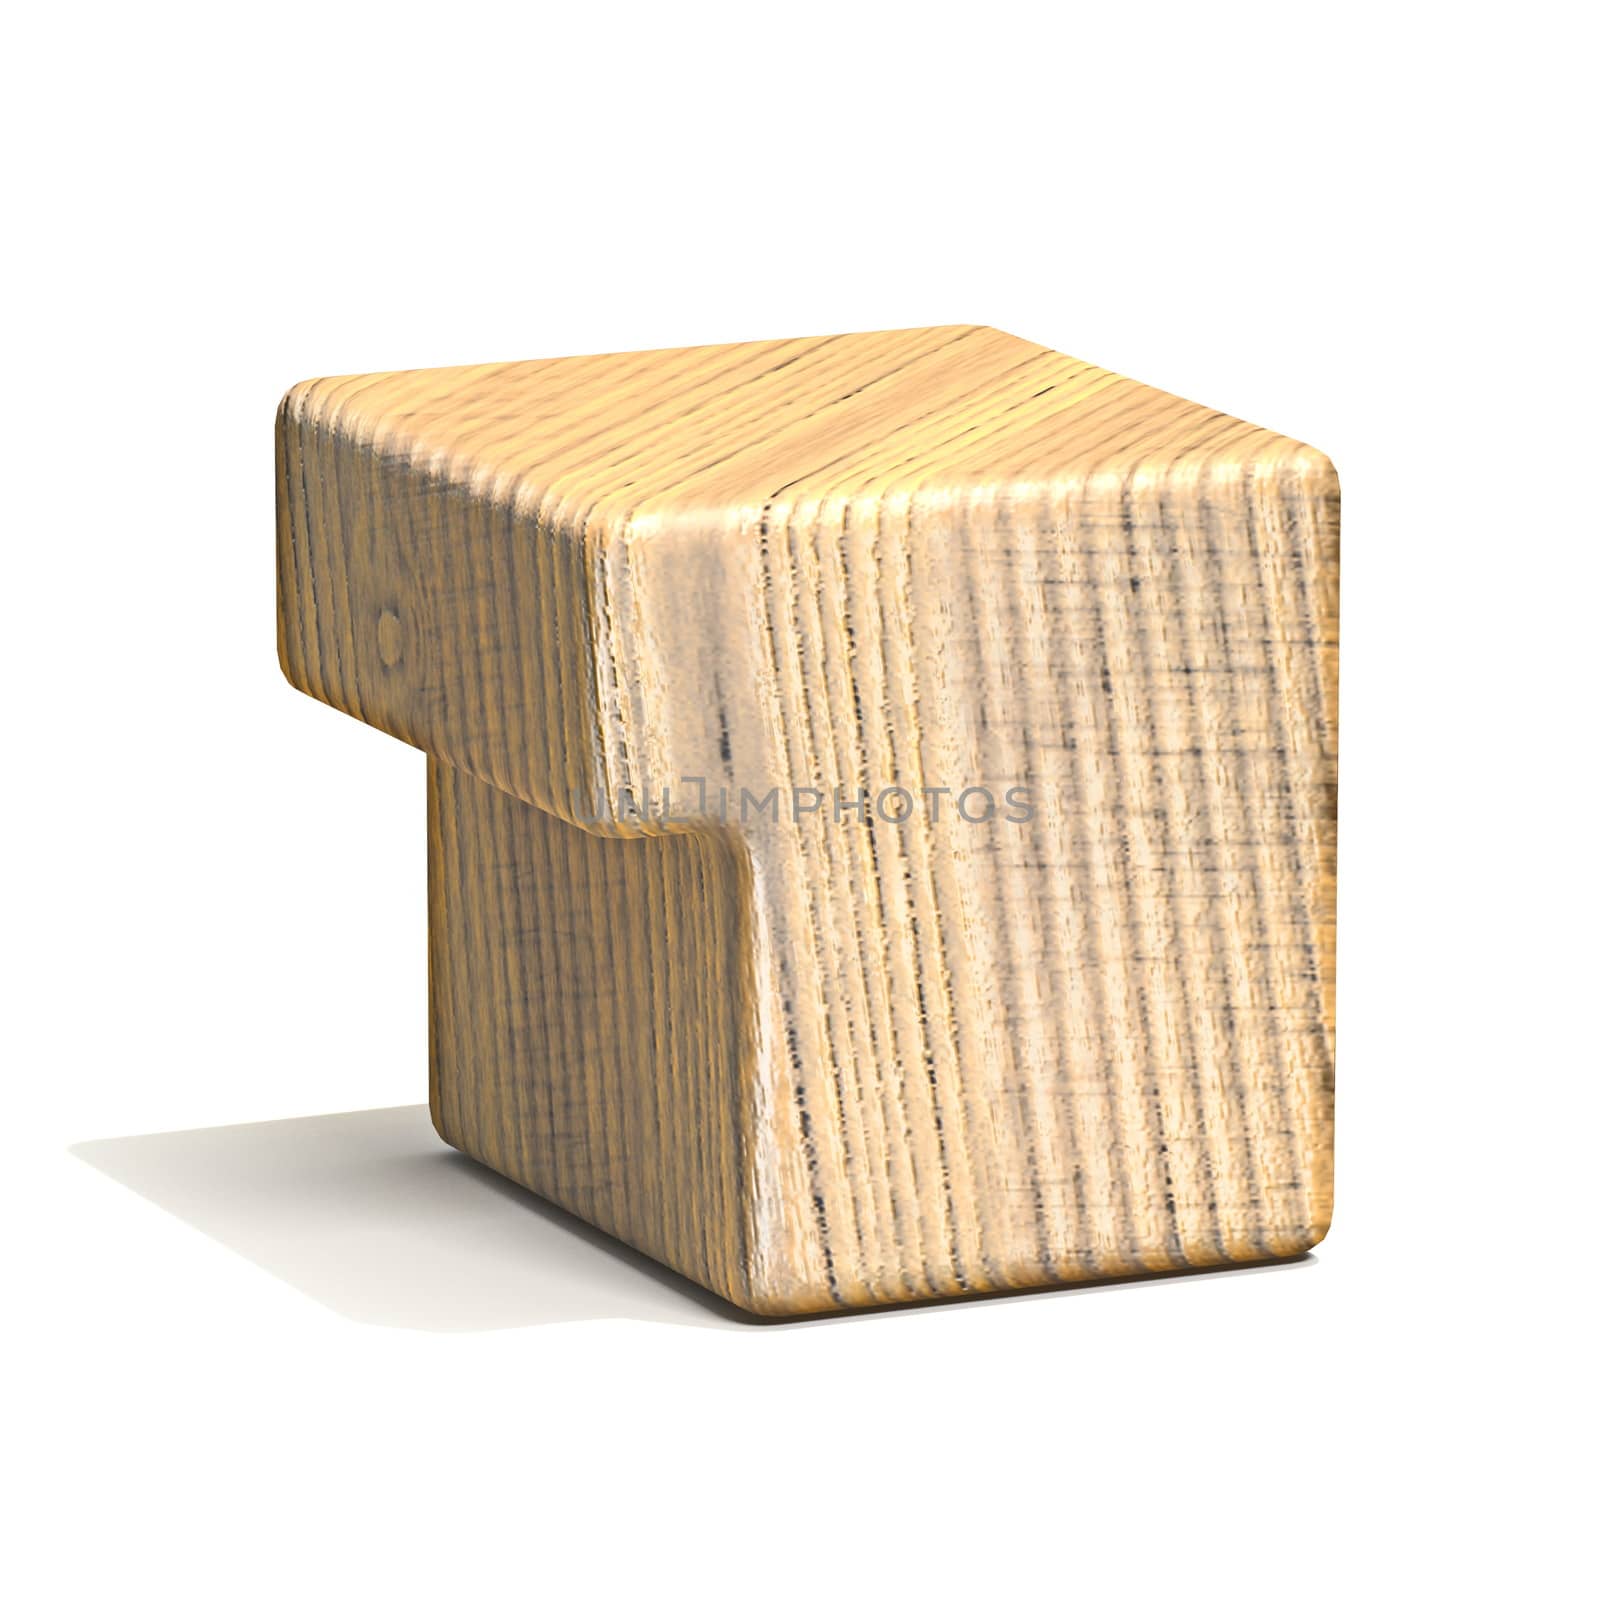 Solid wooden cube font Number 1 ONE 3D render illustration isolated on white background